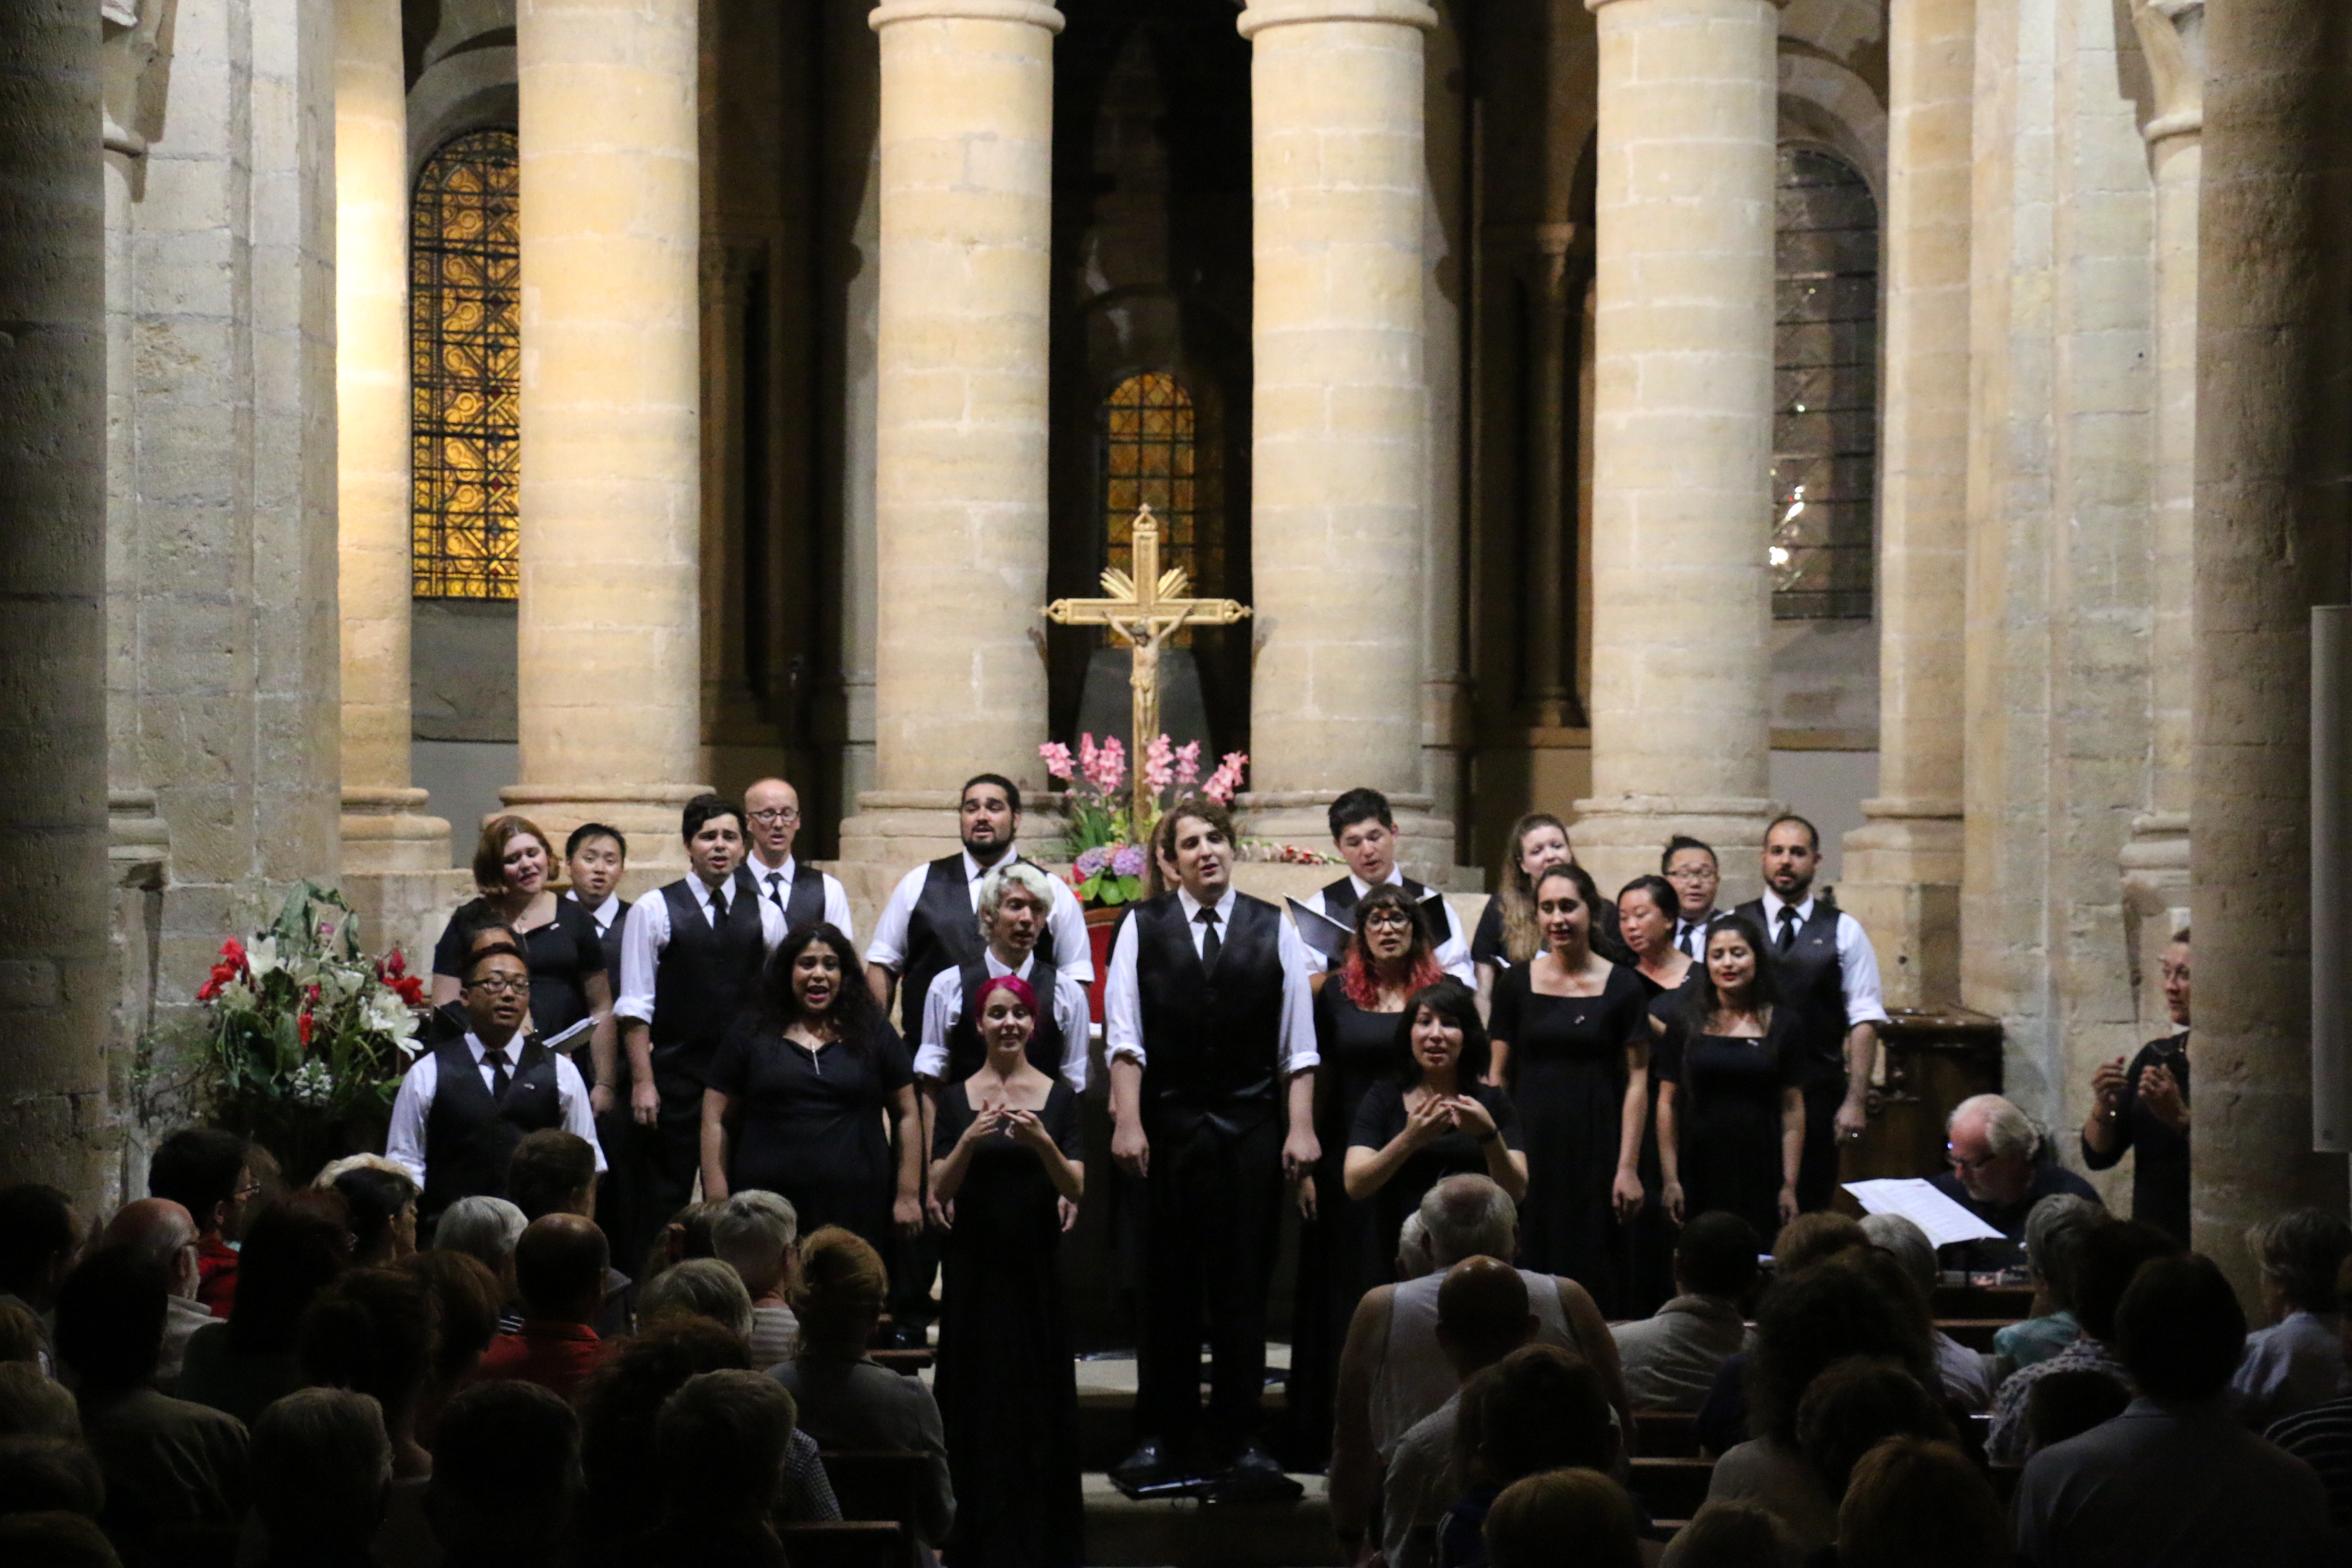 The City Singers perform in Southern France July 2016! 